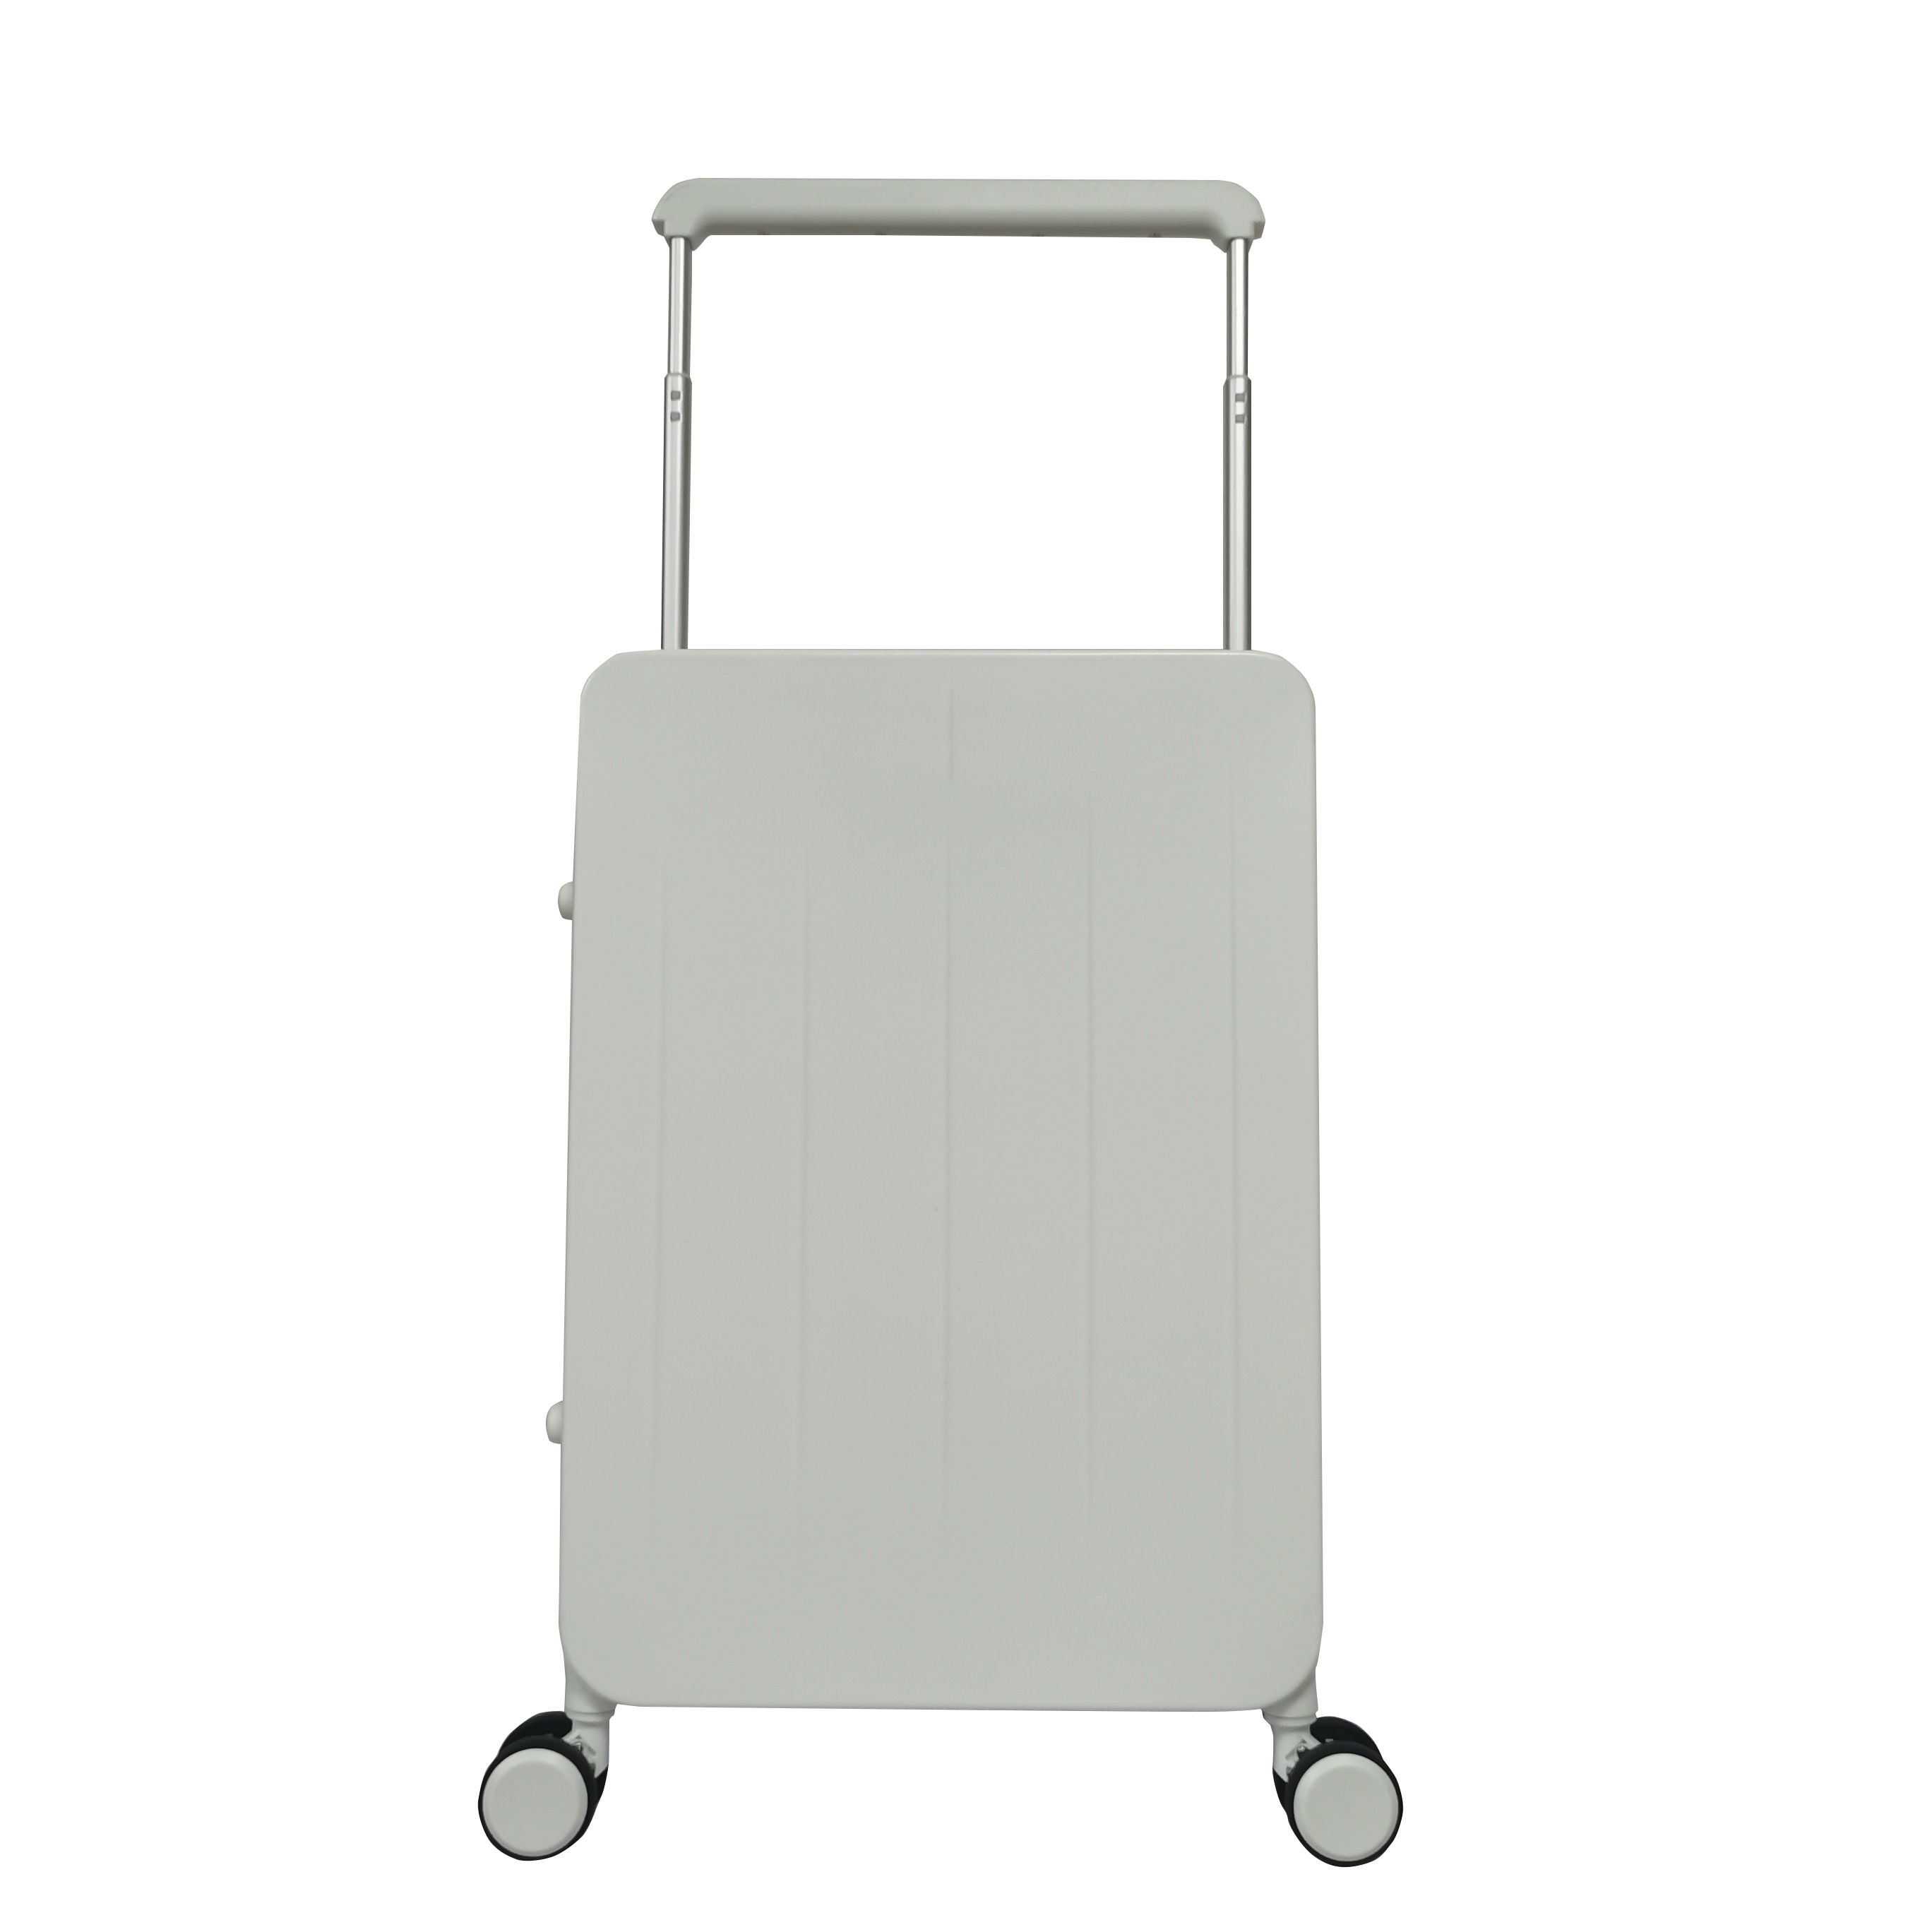 lightest weight suitcase